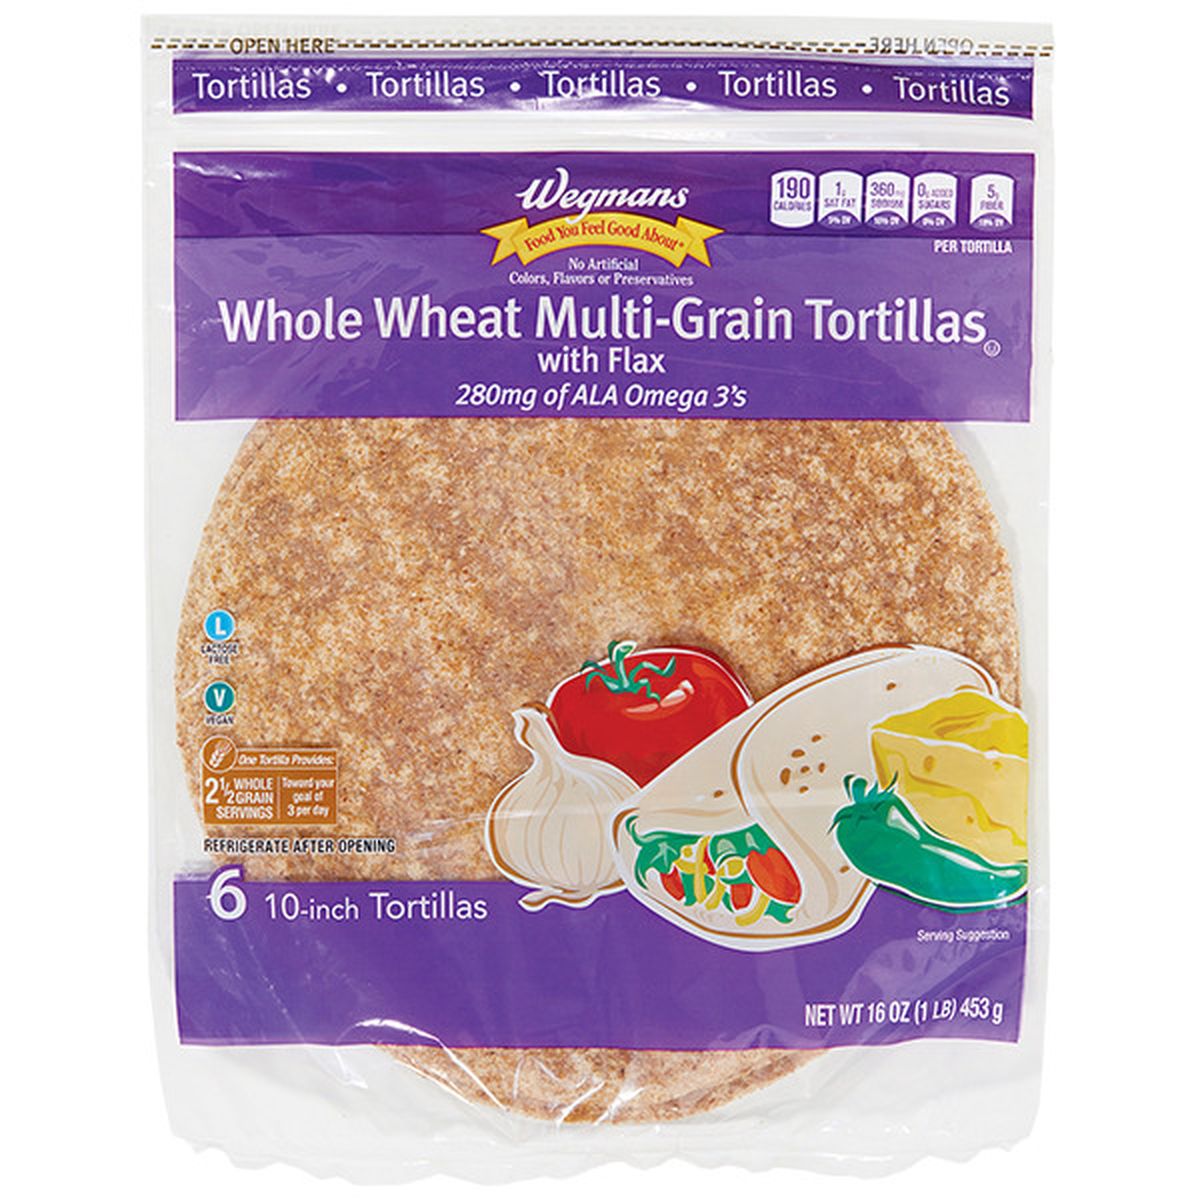 Calories in Wegmans Whole Wheat Multi-Grain Tortillas with Flax, 10 Inch, 6 Count